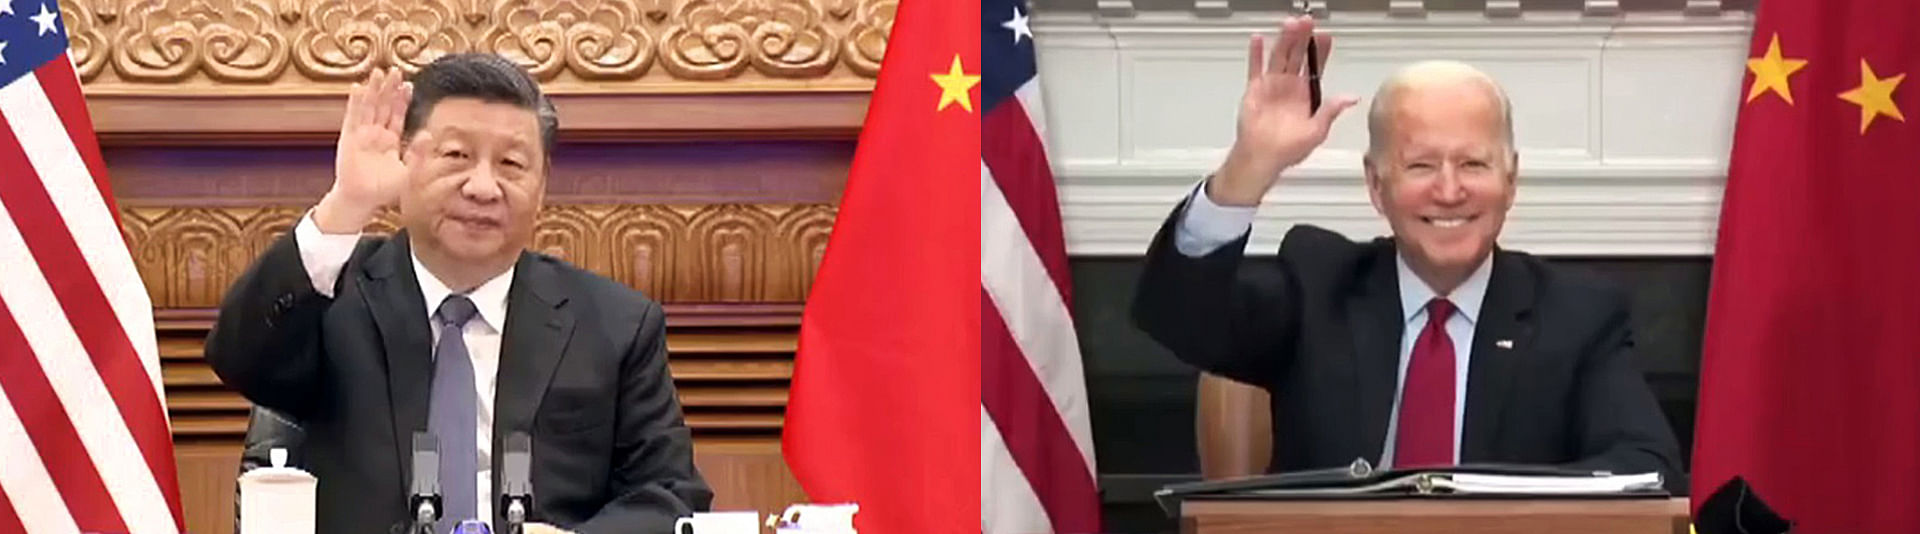 Hello from Xi and Biden